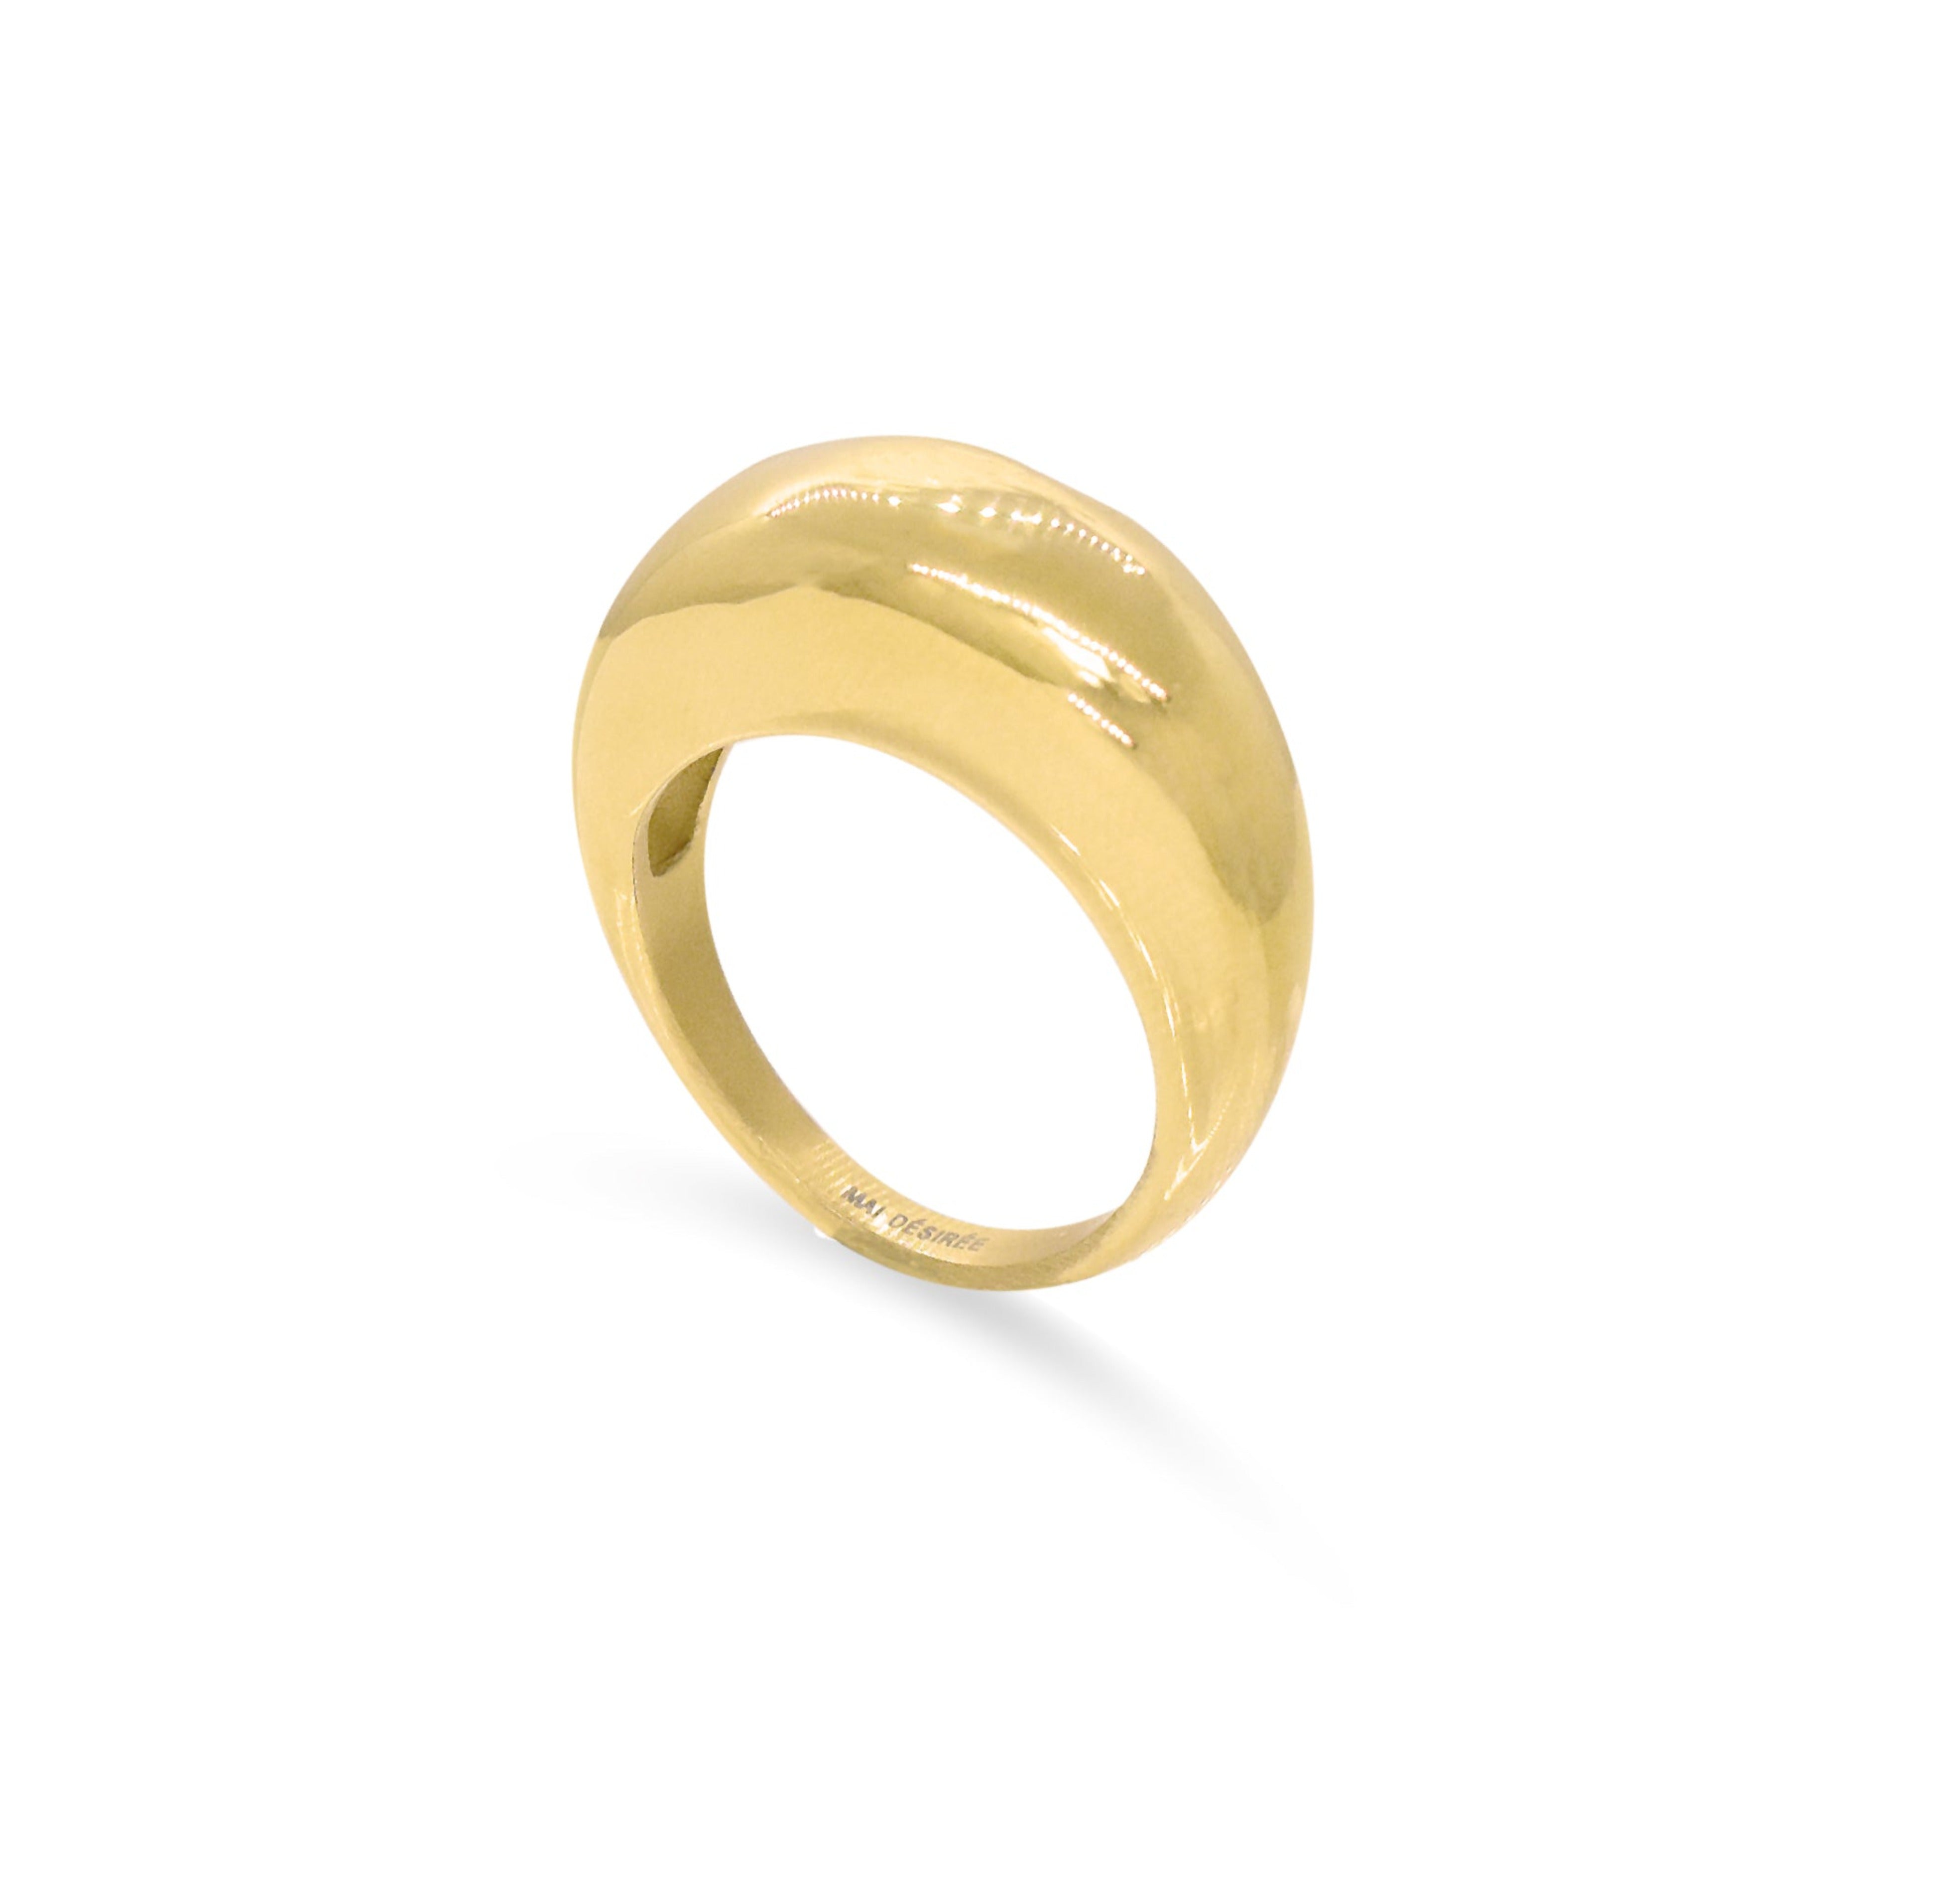 Gold dome ring sample Hugh quality waterproof jewelry 